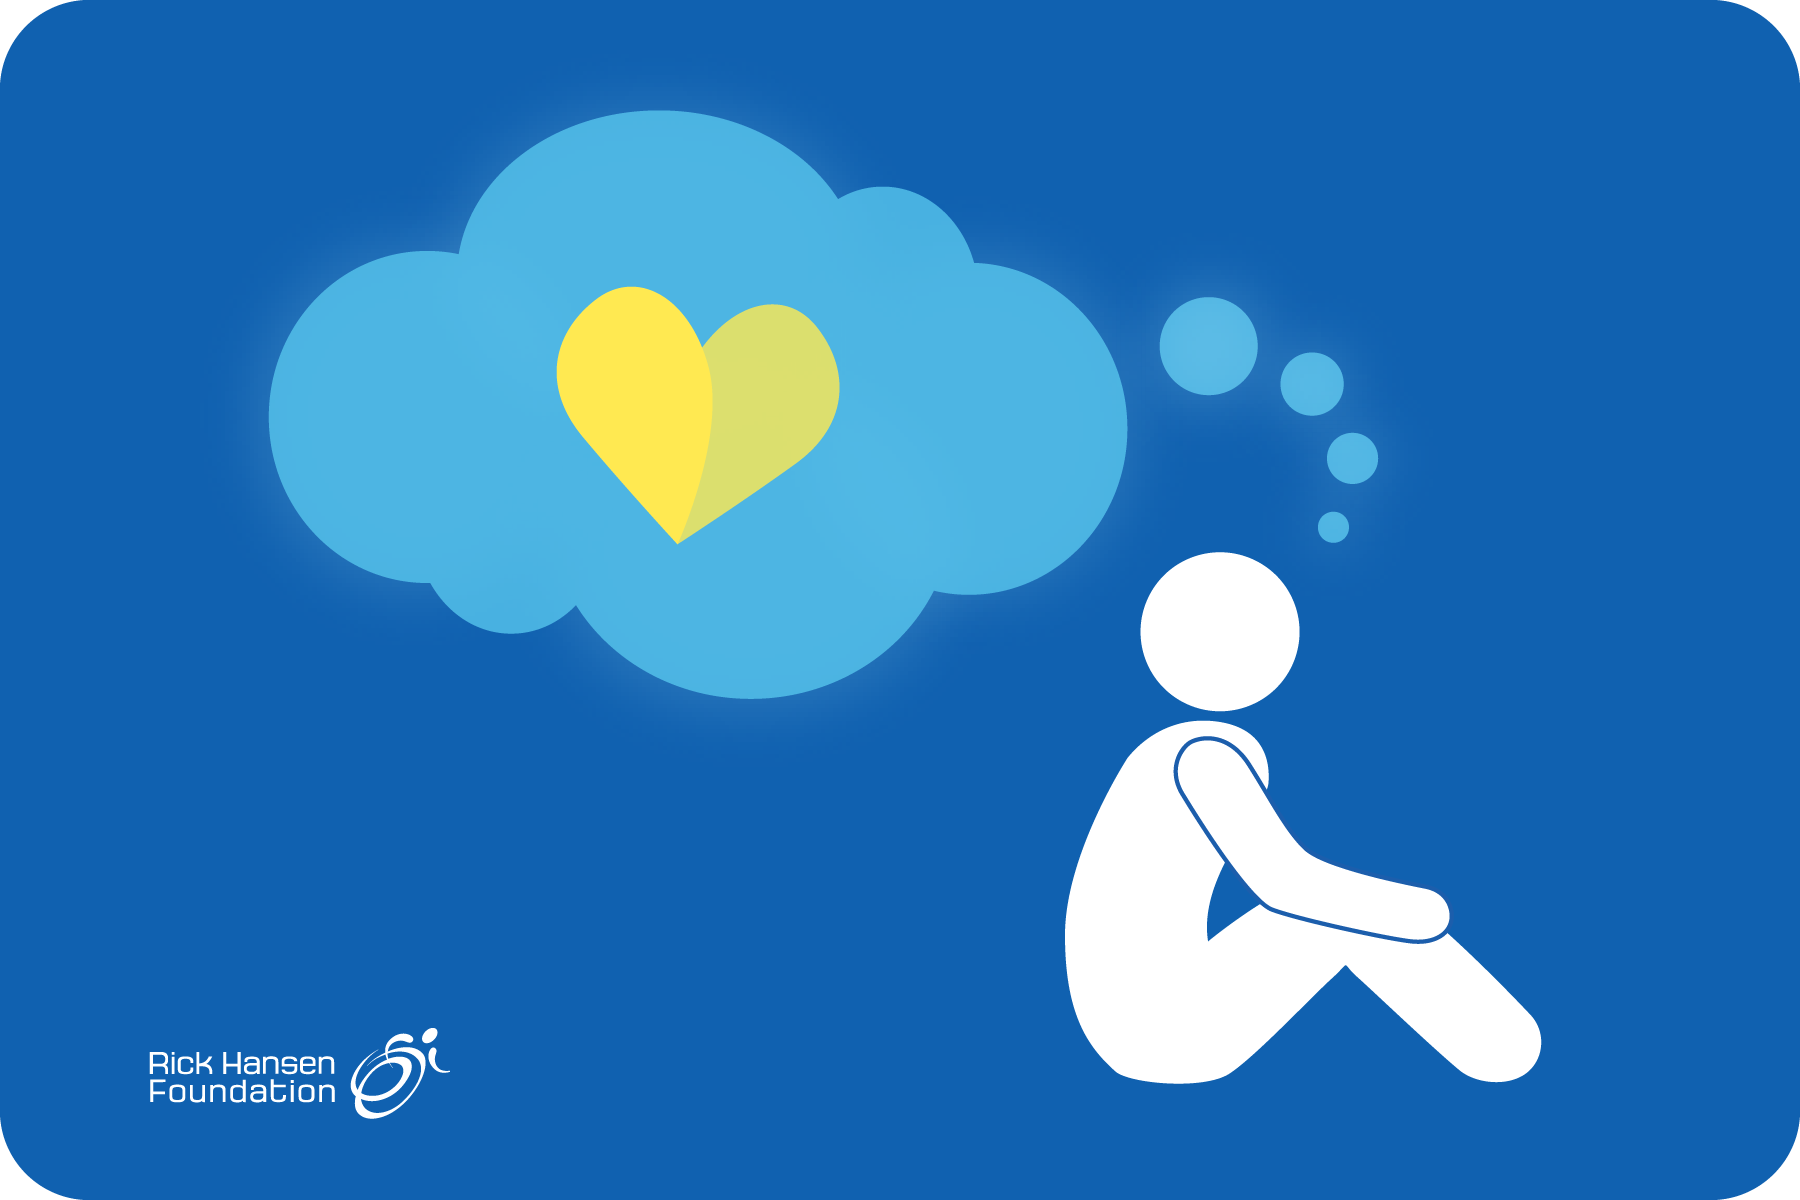 Blue background with white graphic of a person sitting down. There is a light blue thought bubble with a yellow heart inside. The Rick Hansen Foundation logo is in the bottom left corner.